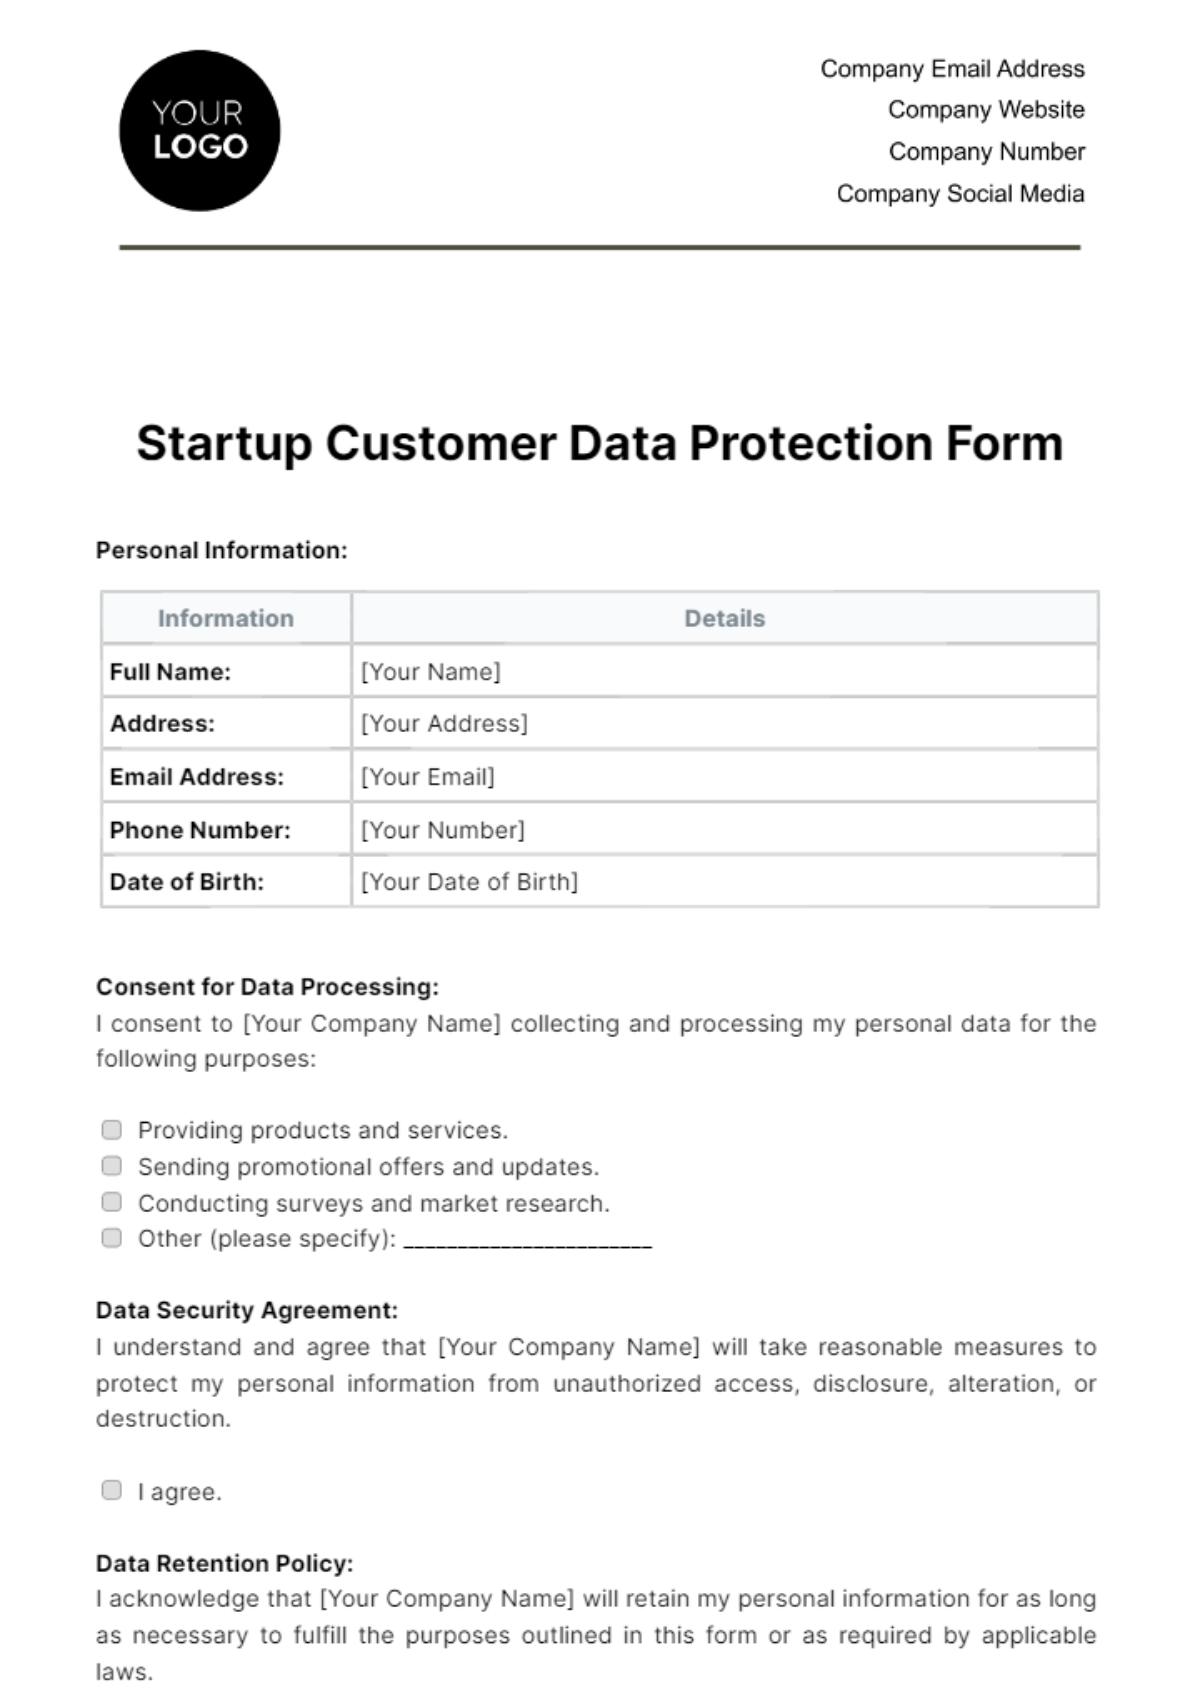 Startup Customer Data Protection Form Template